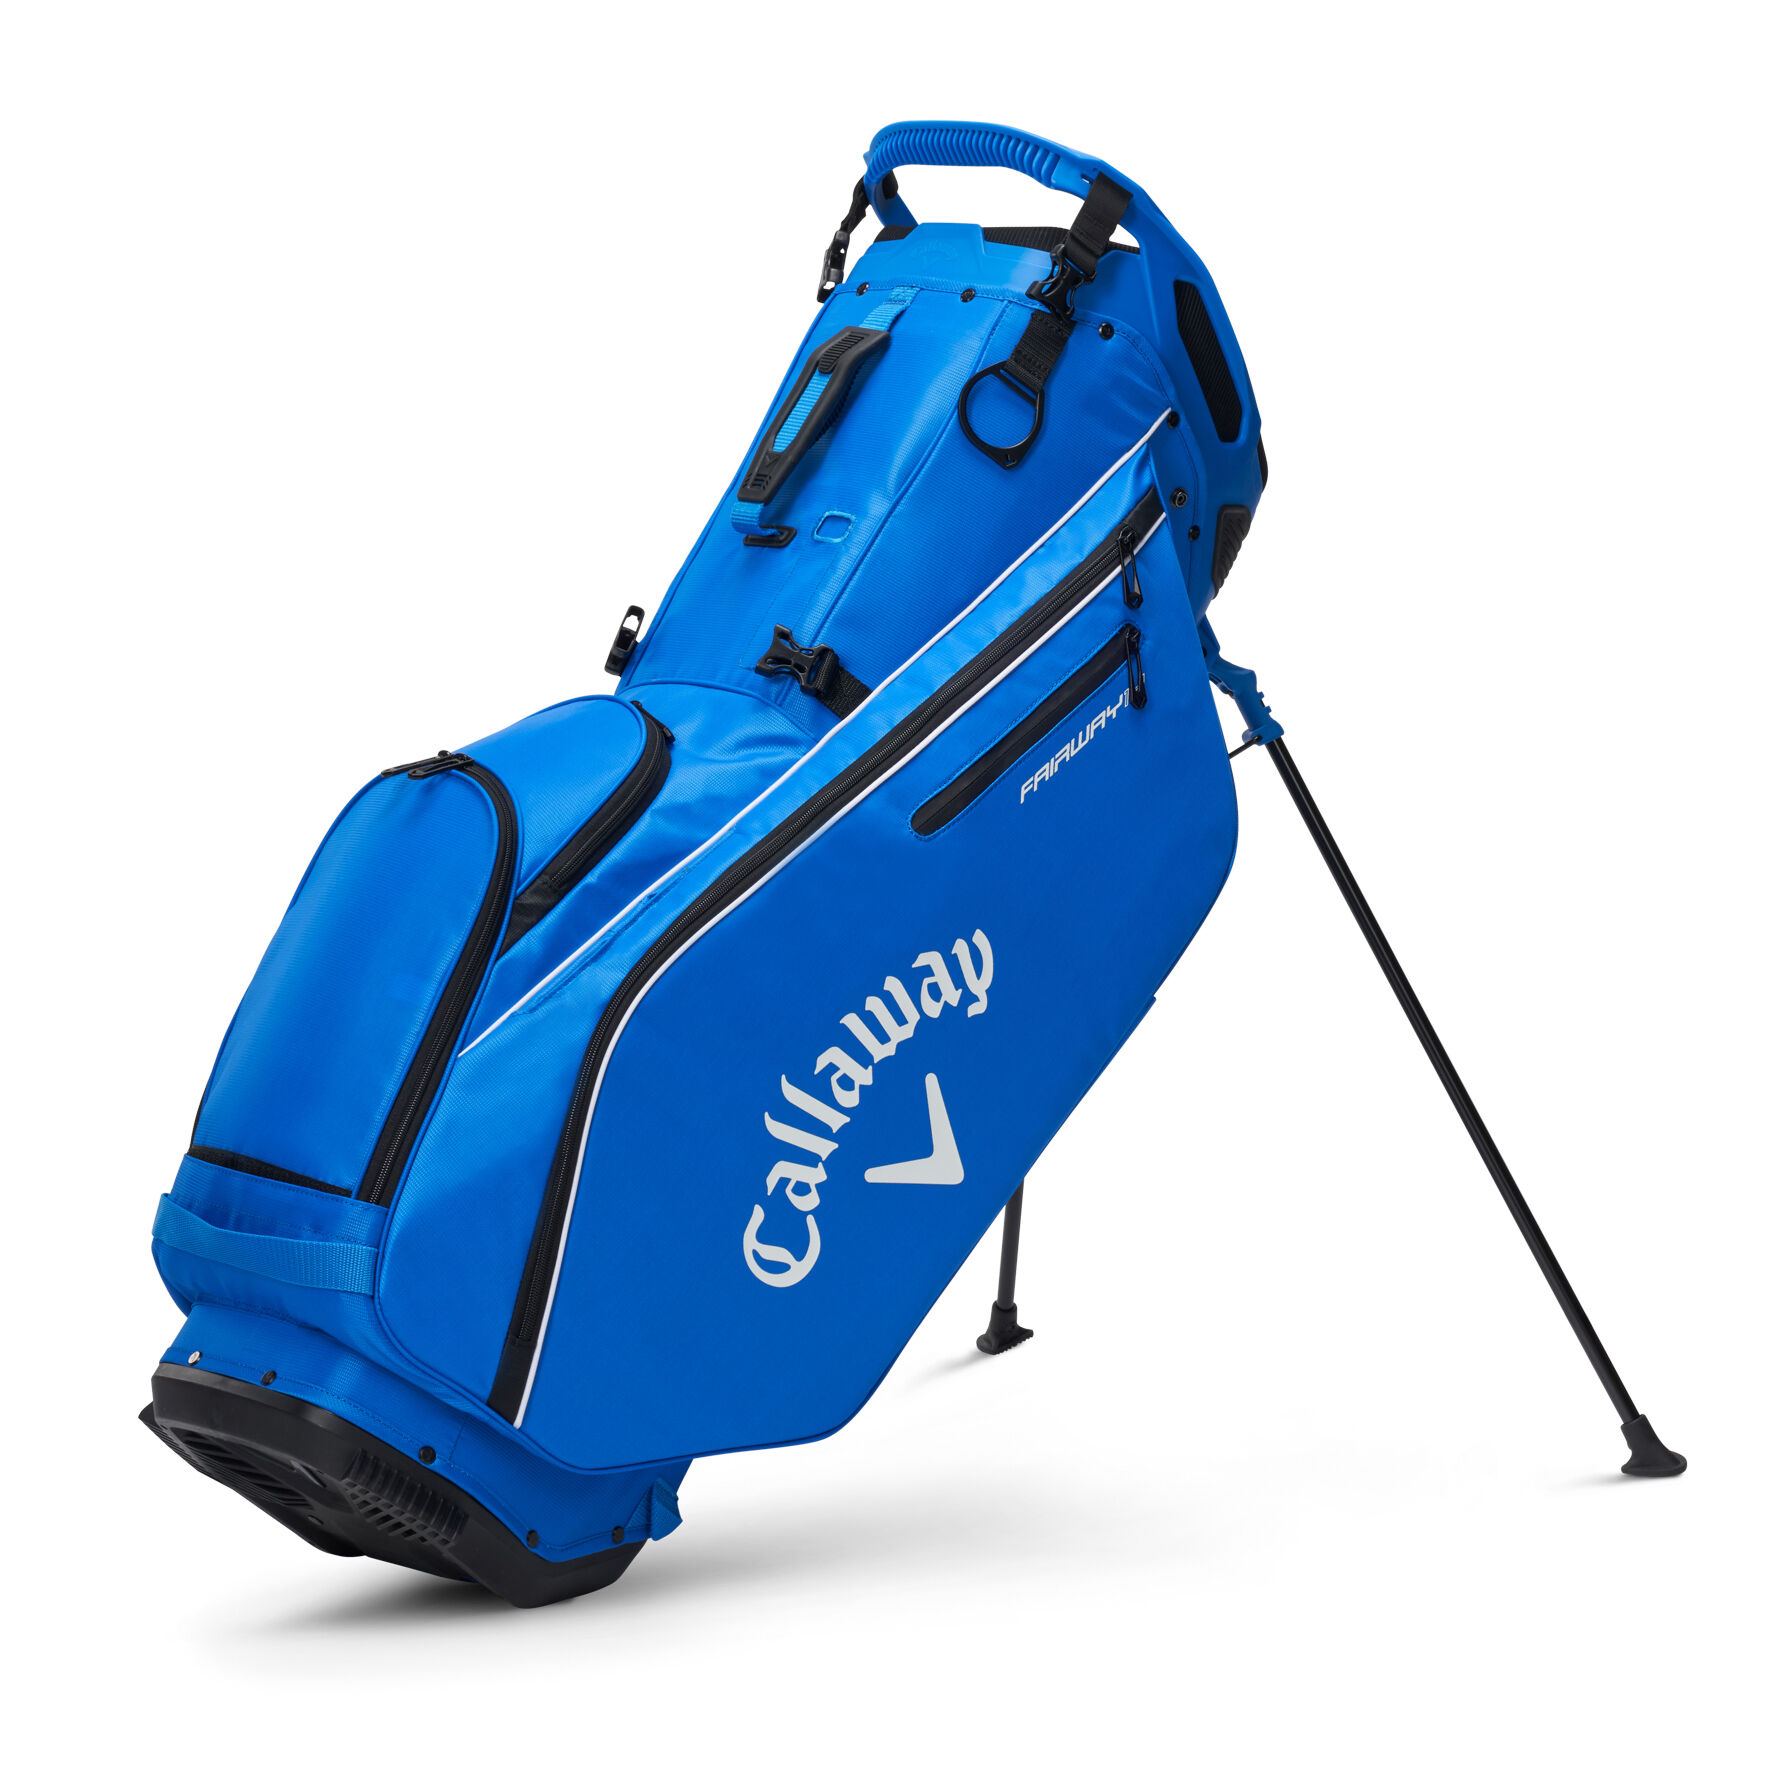 Thinking of buying a Jones golf bag, anyone has one and can offer their  impression? : r/golf